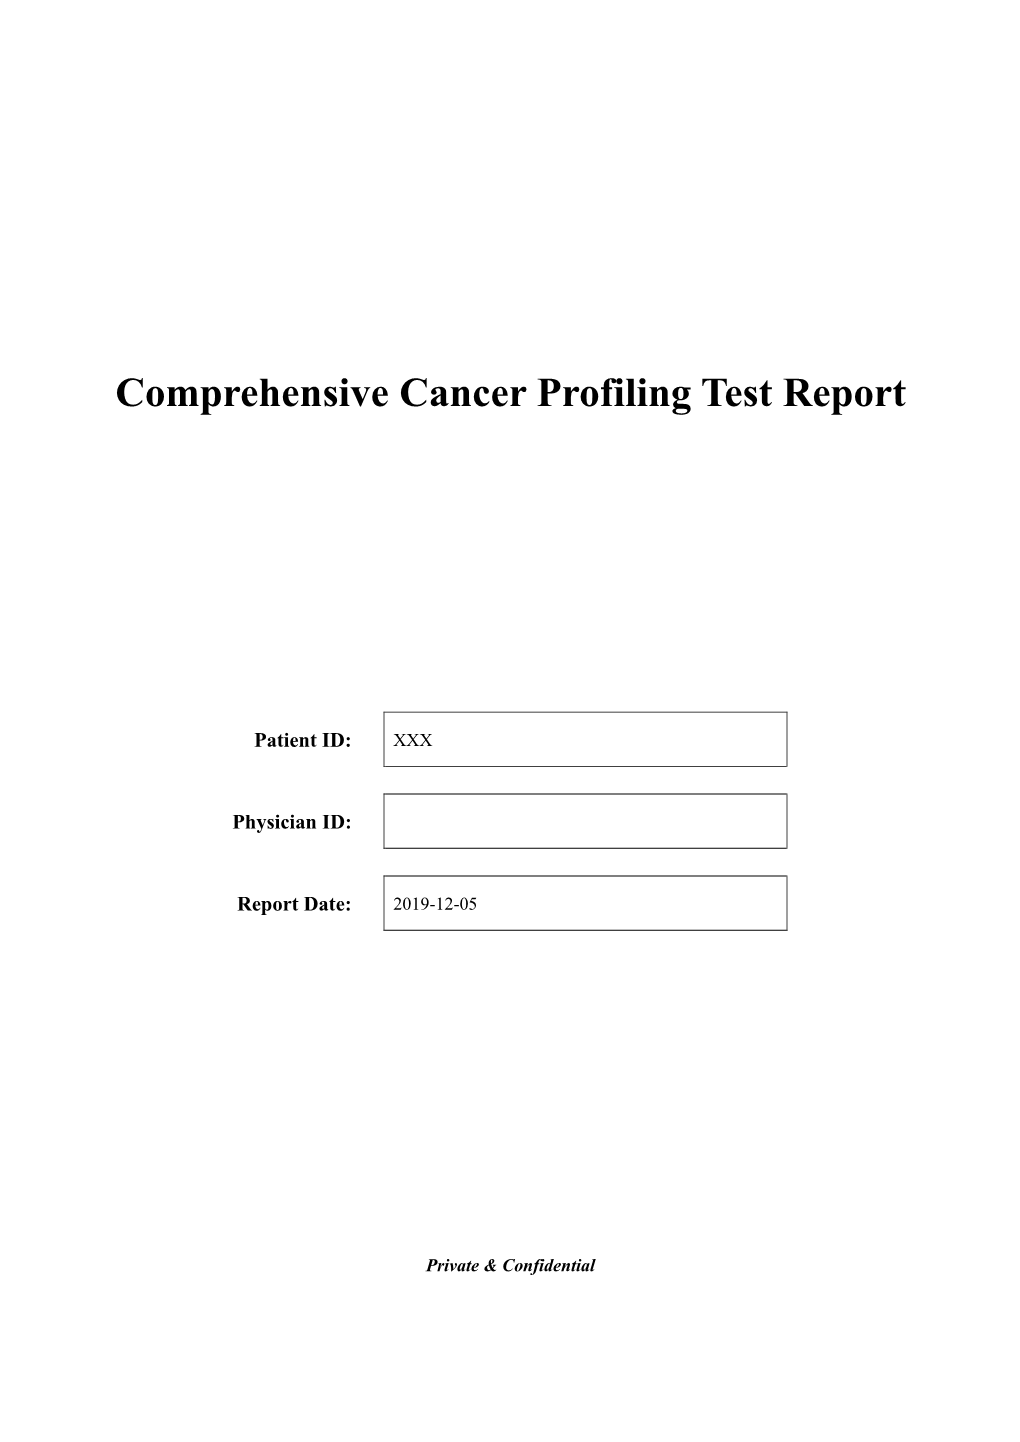 Download Demo Report of Novopm™ 2.0-Lung Cancer